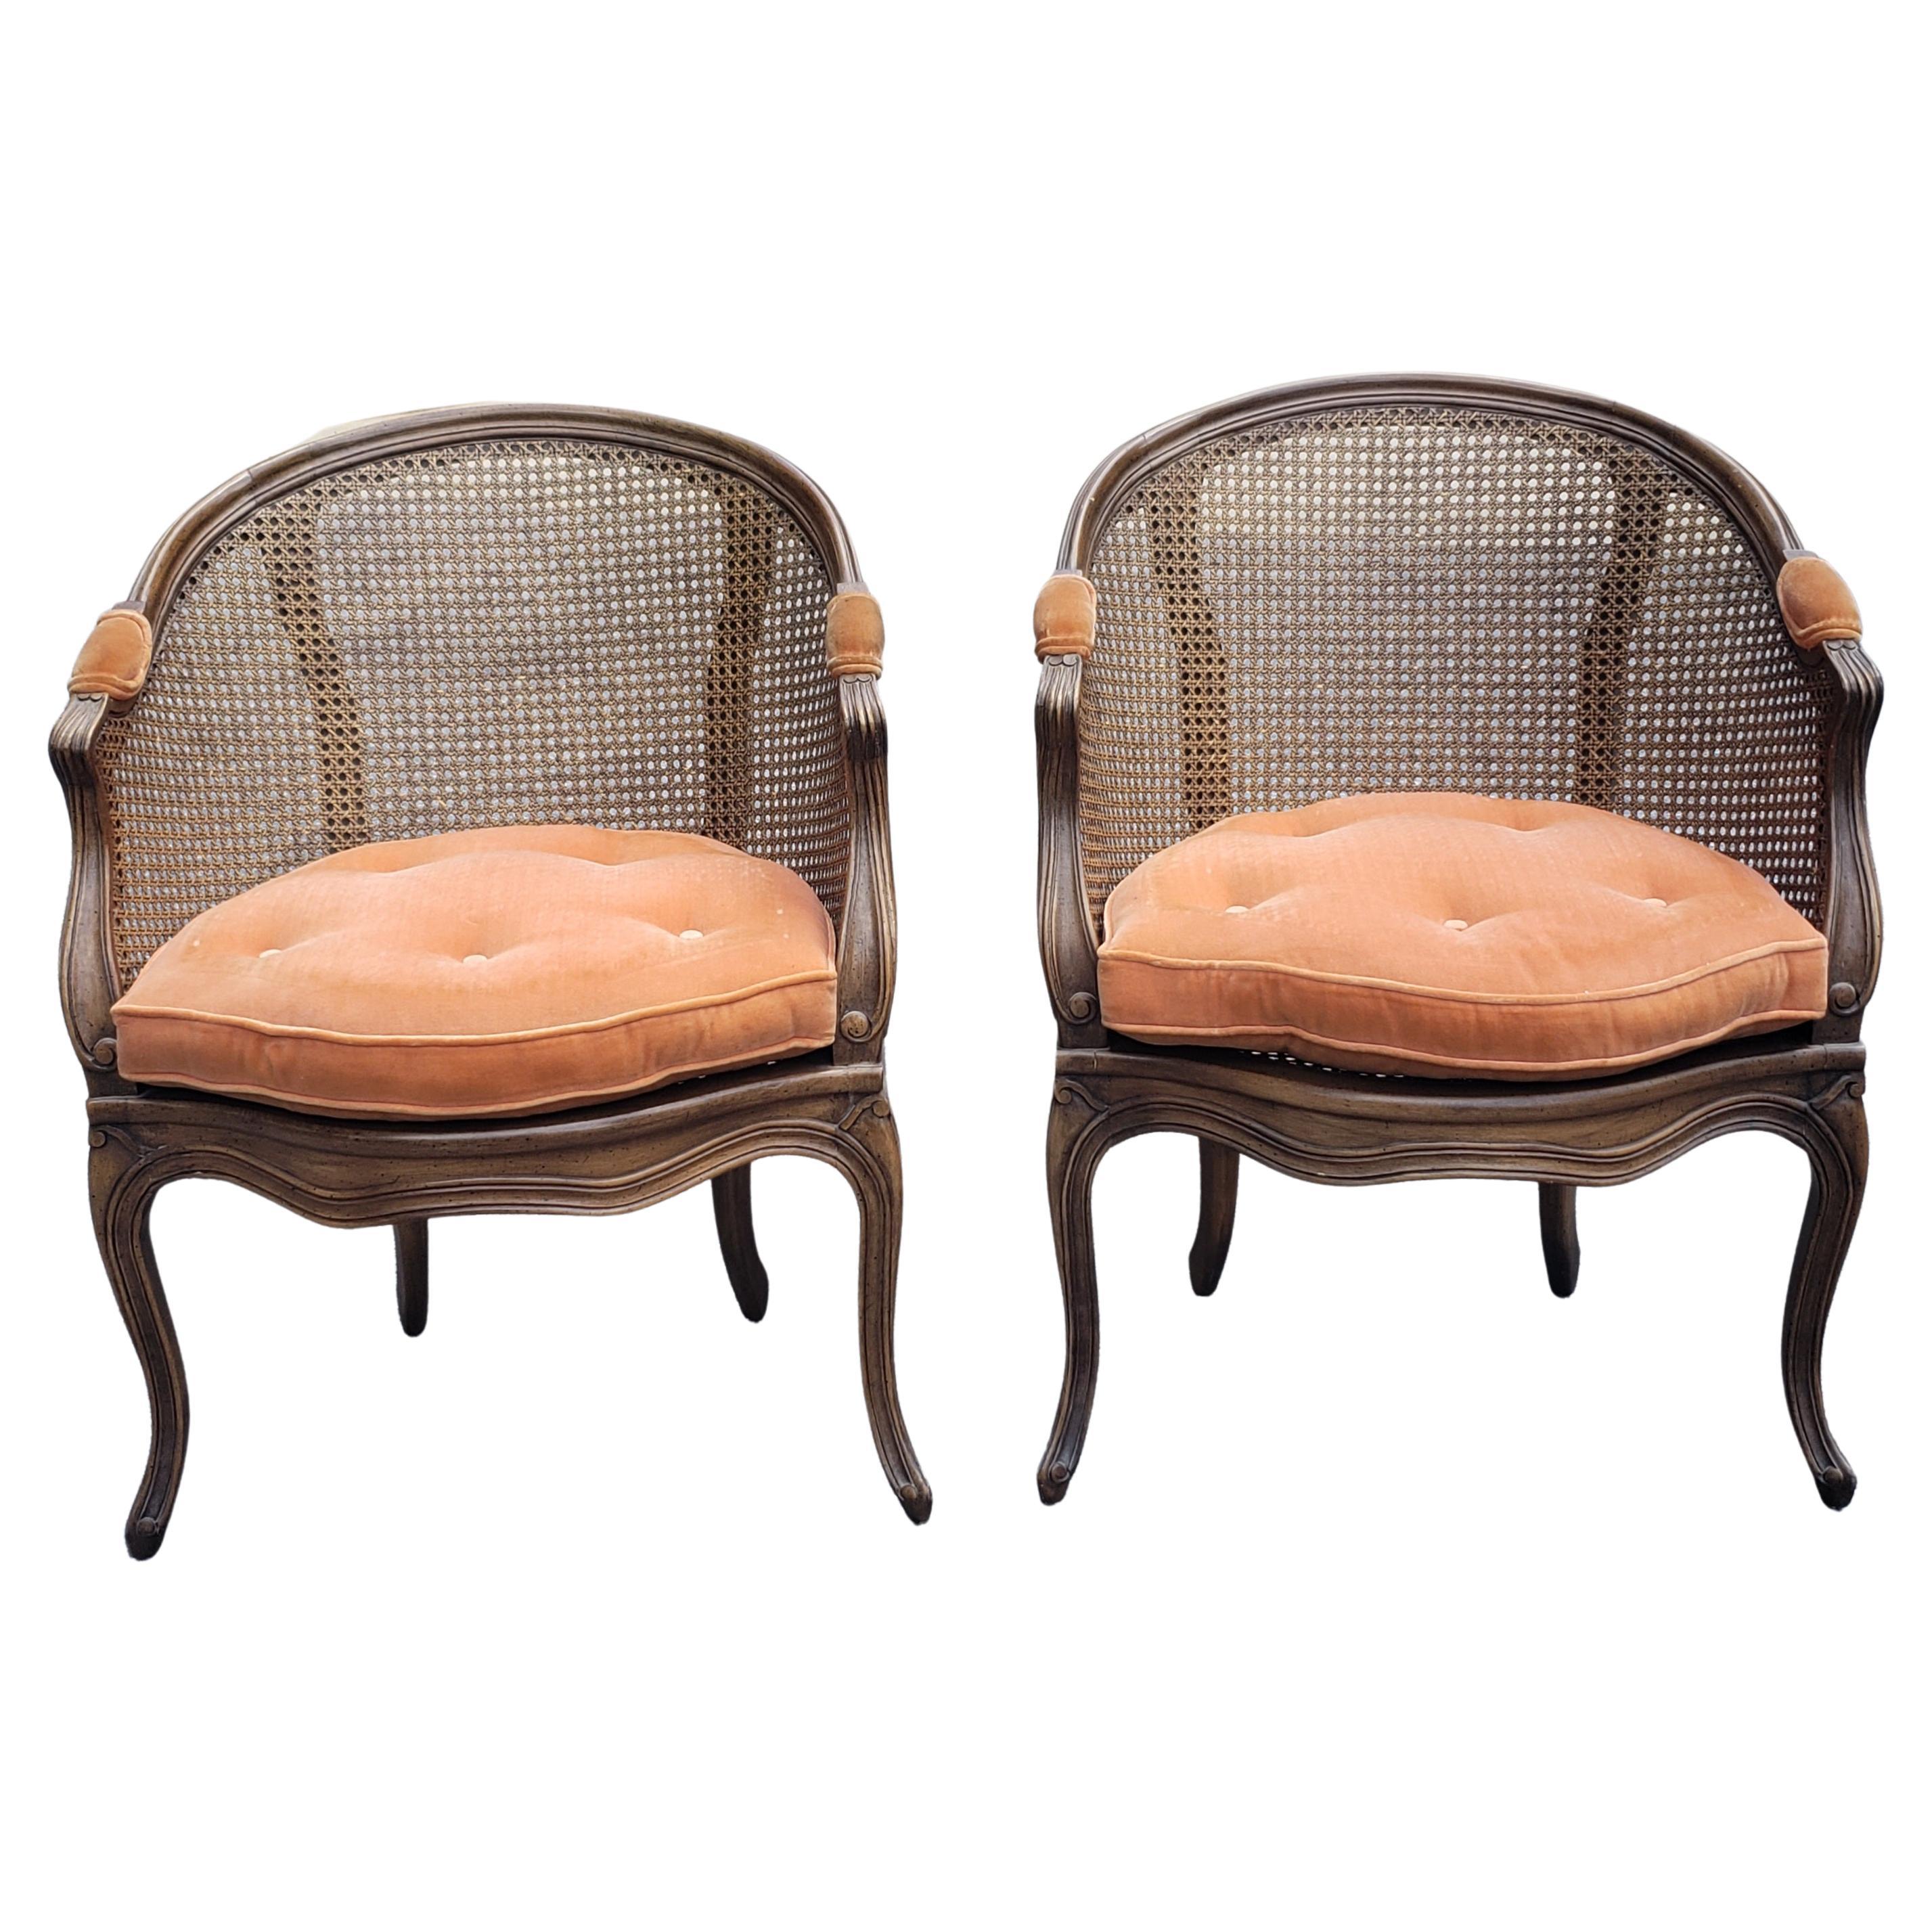 French Country Walnut and Cane Tufted Upholstered Seat Chairs, a Pair